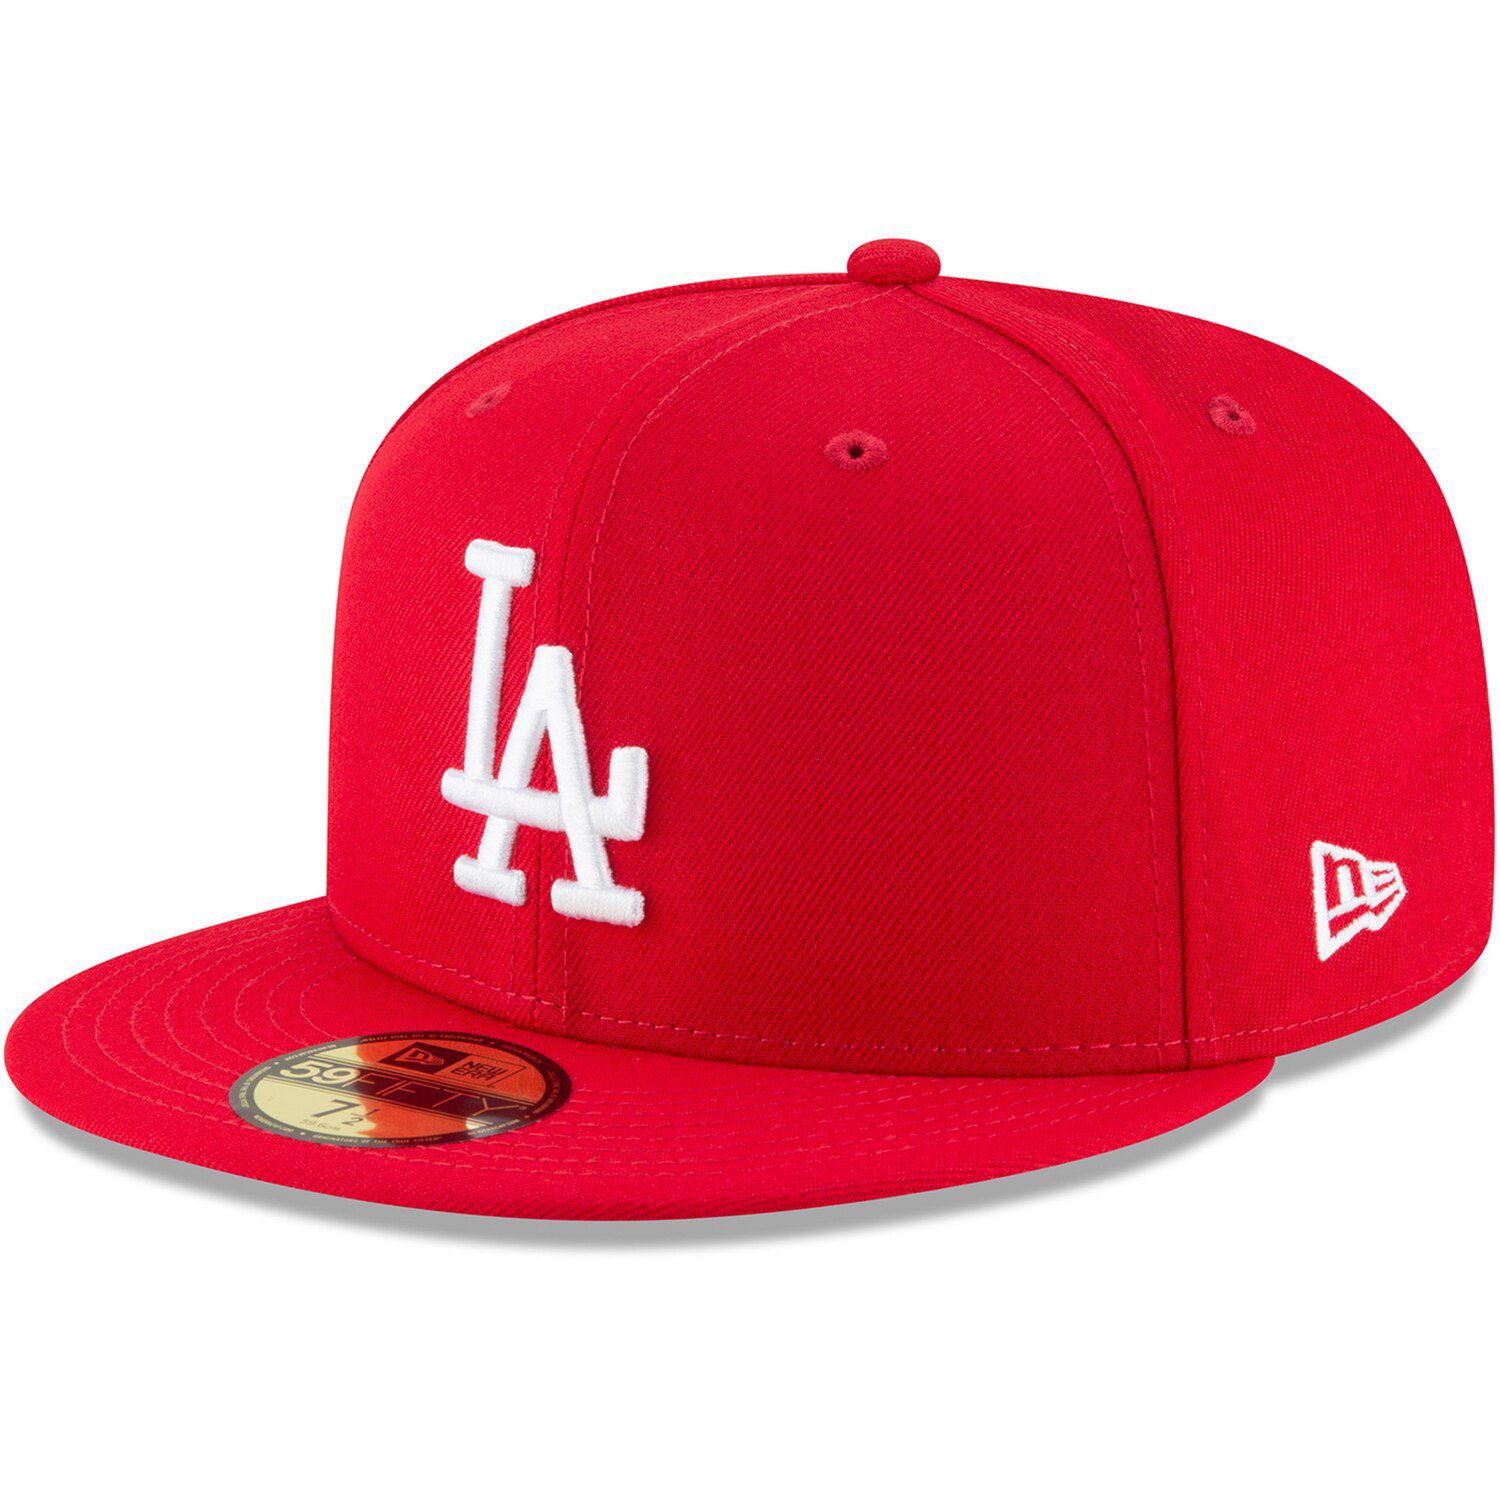 Basic 59FIFTY Fitted Hat